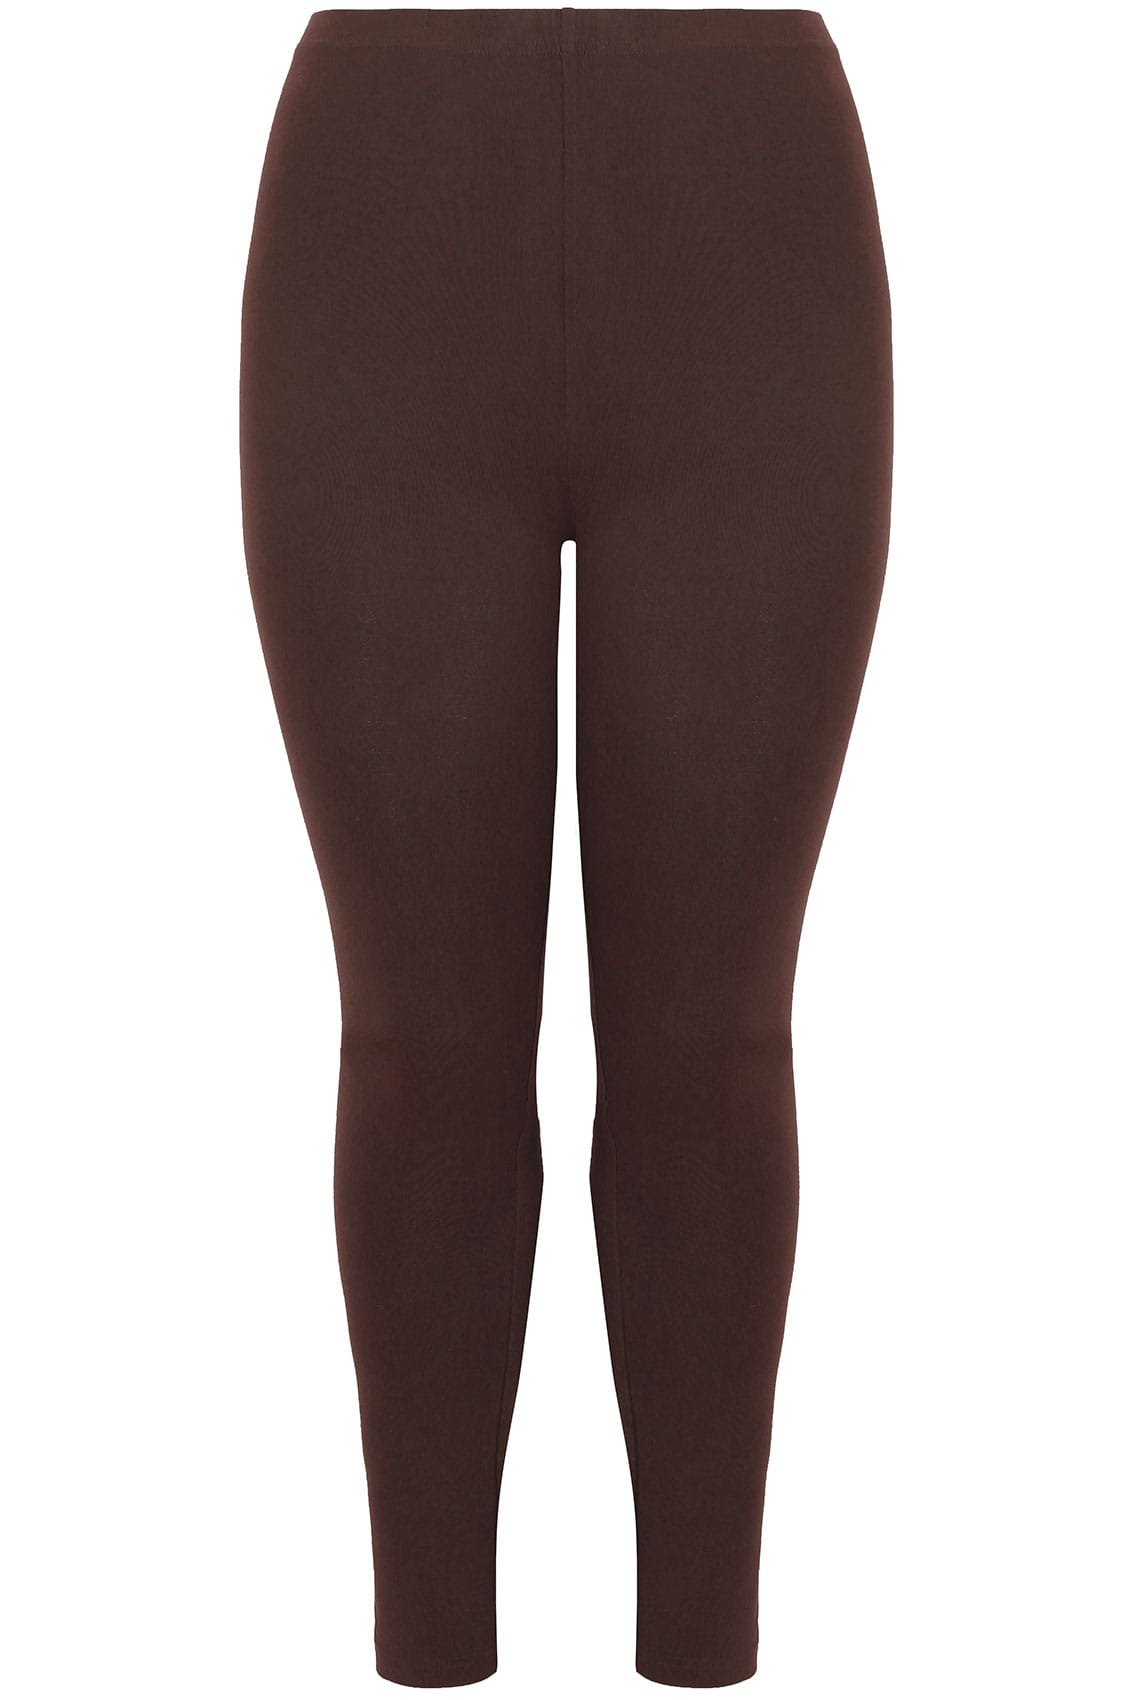 Chocolate Brown Soft Touch Leggings, Plus size 16 to 36